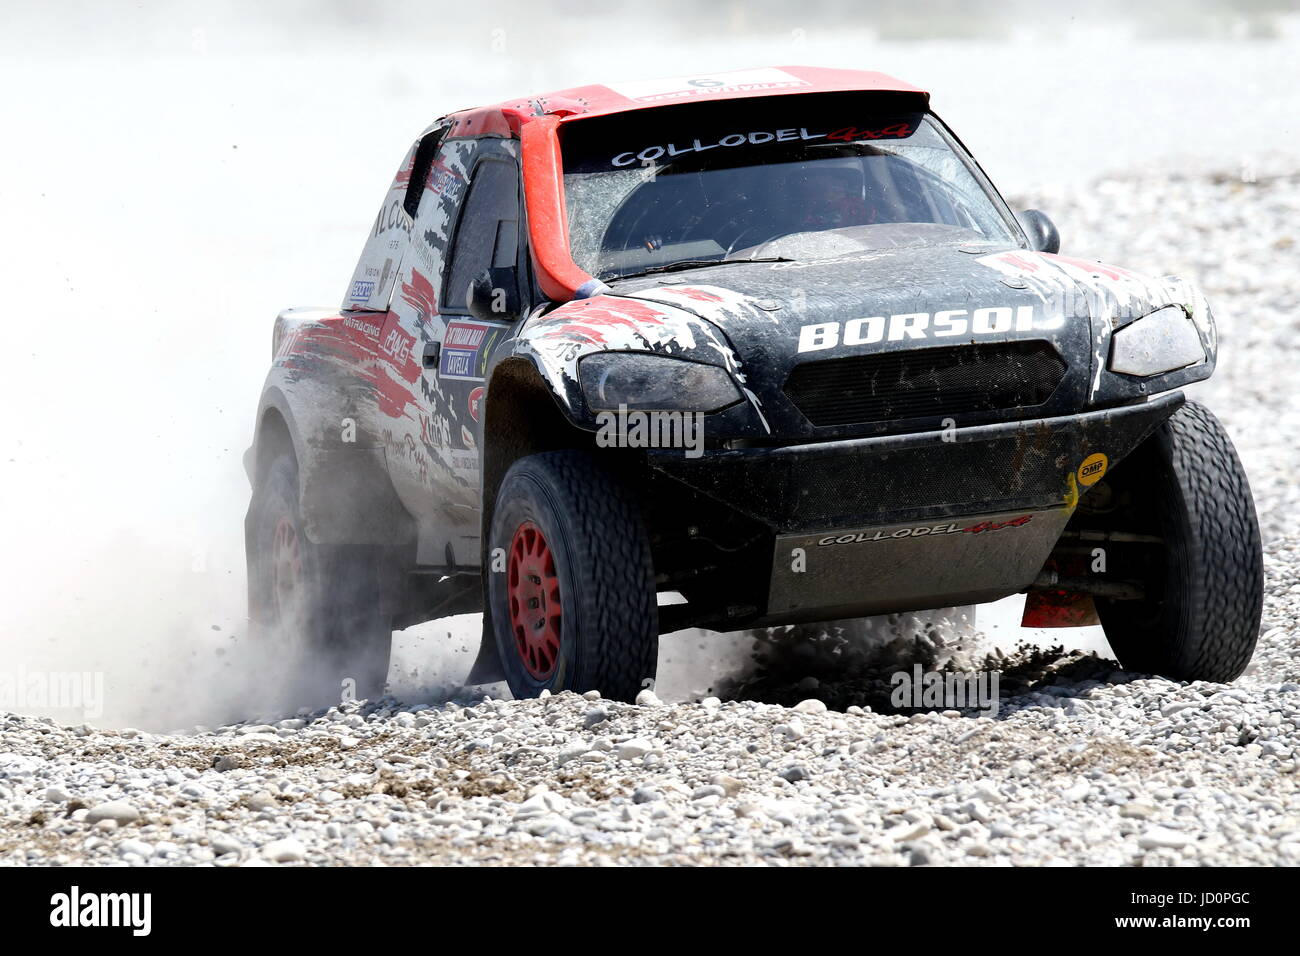 Valvasone, Italy. 17th June, 2017. ITALY, Valvasone: BORSOI ELVIS ITA BORSOI ELVIS ROSSI STEFANO TOYOTA TOYODELL competes during Leg3 of the 24th edition of the World Cup for Cross Country Rallies - Italian Baja 2017 on 17th June, 2017 Credit: Andrea Spinelli/Alamy Live News Stock Photo